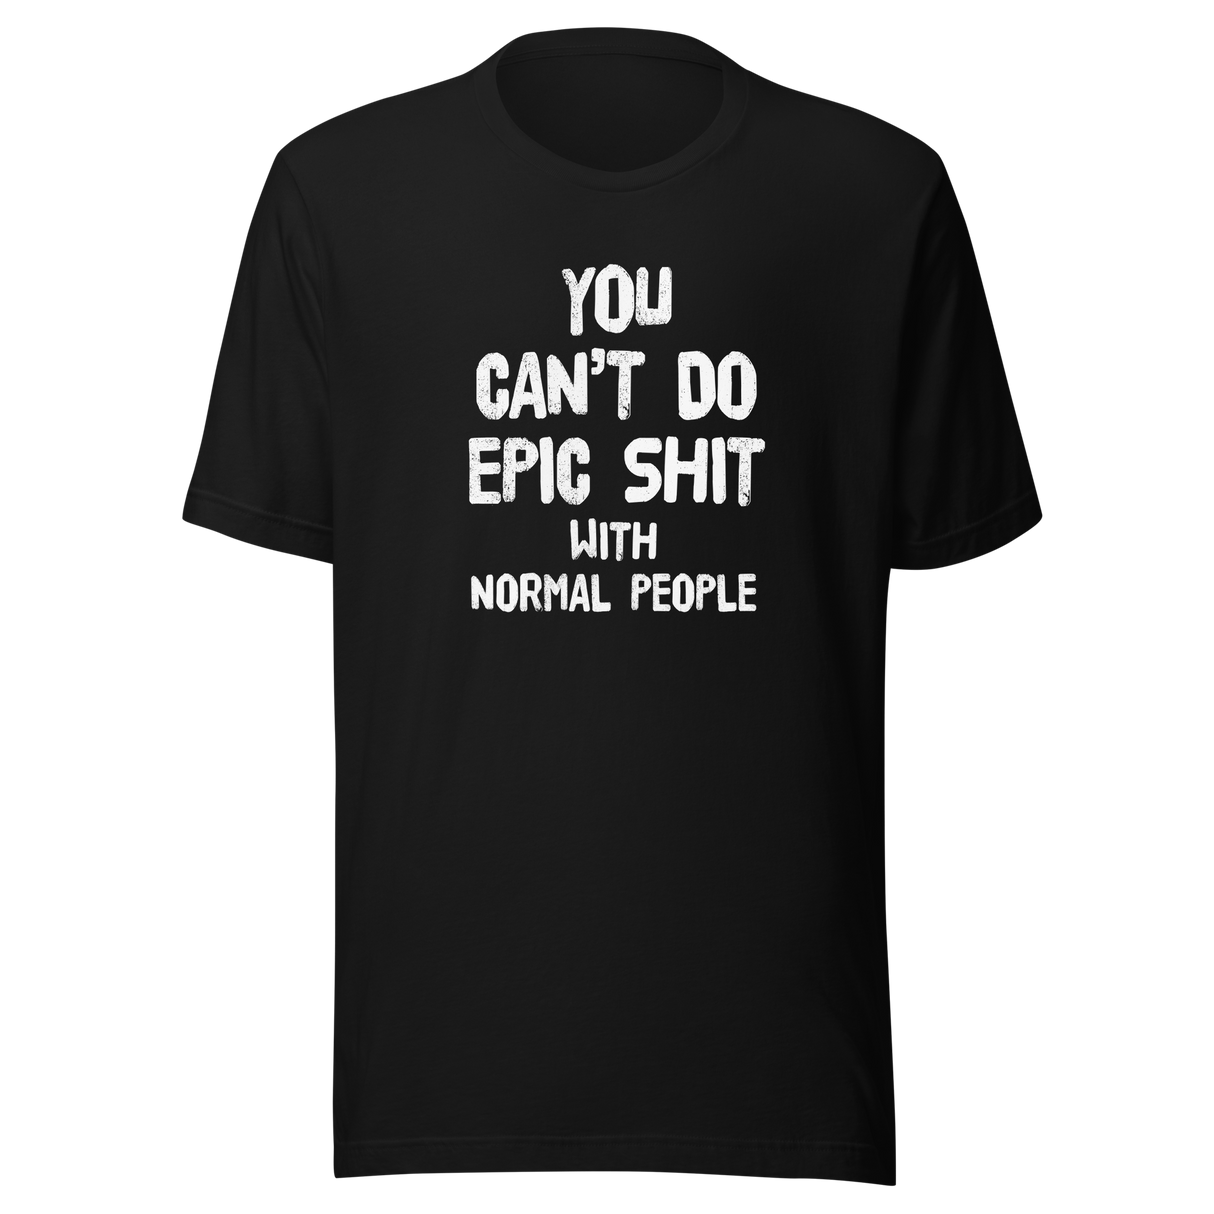 you-cant-do-epic-shit-with-normal-people-epic-tee-normal-people-t-shirt-shit-tee-t-shirt-tee#color_black